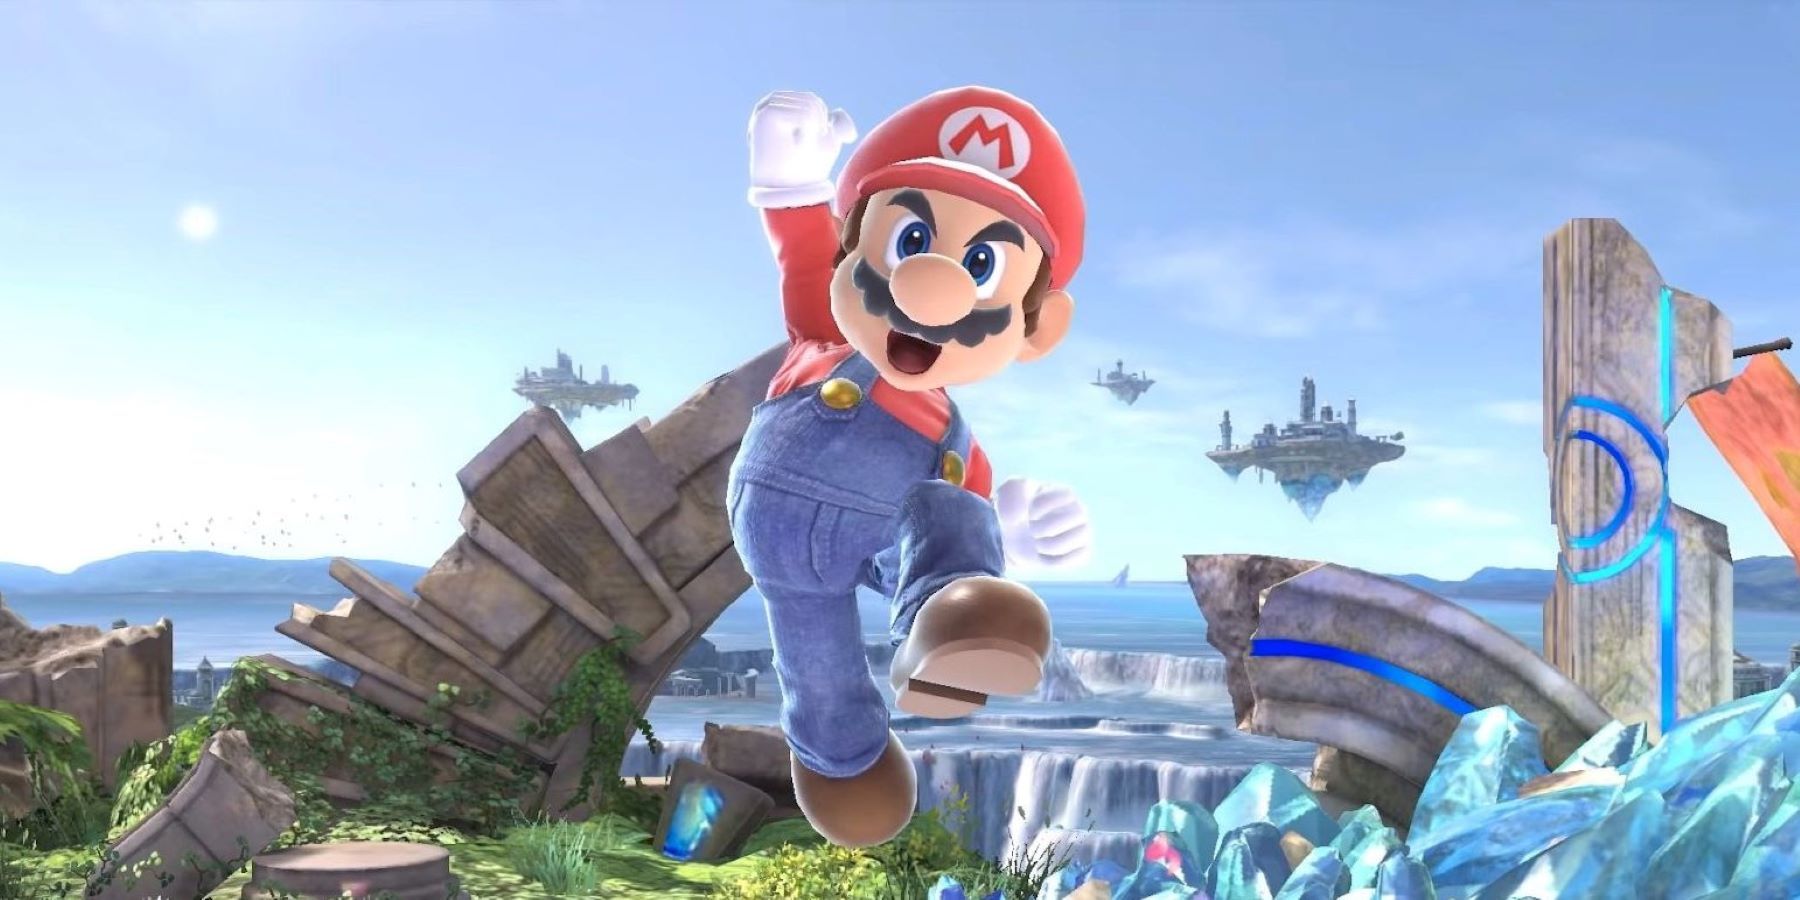 Mario jumping in his spawn animation in Super Smash Bros. Ultimate